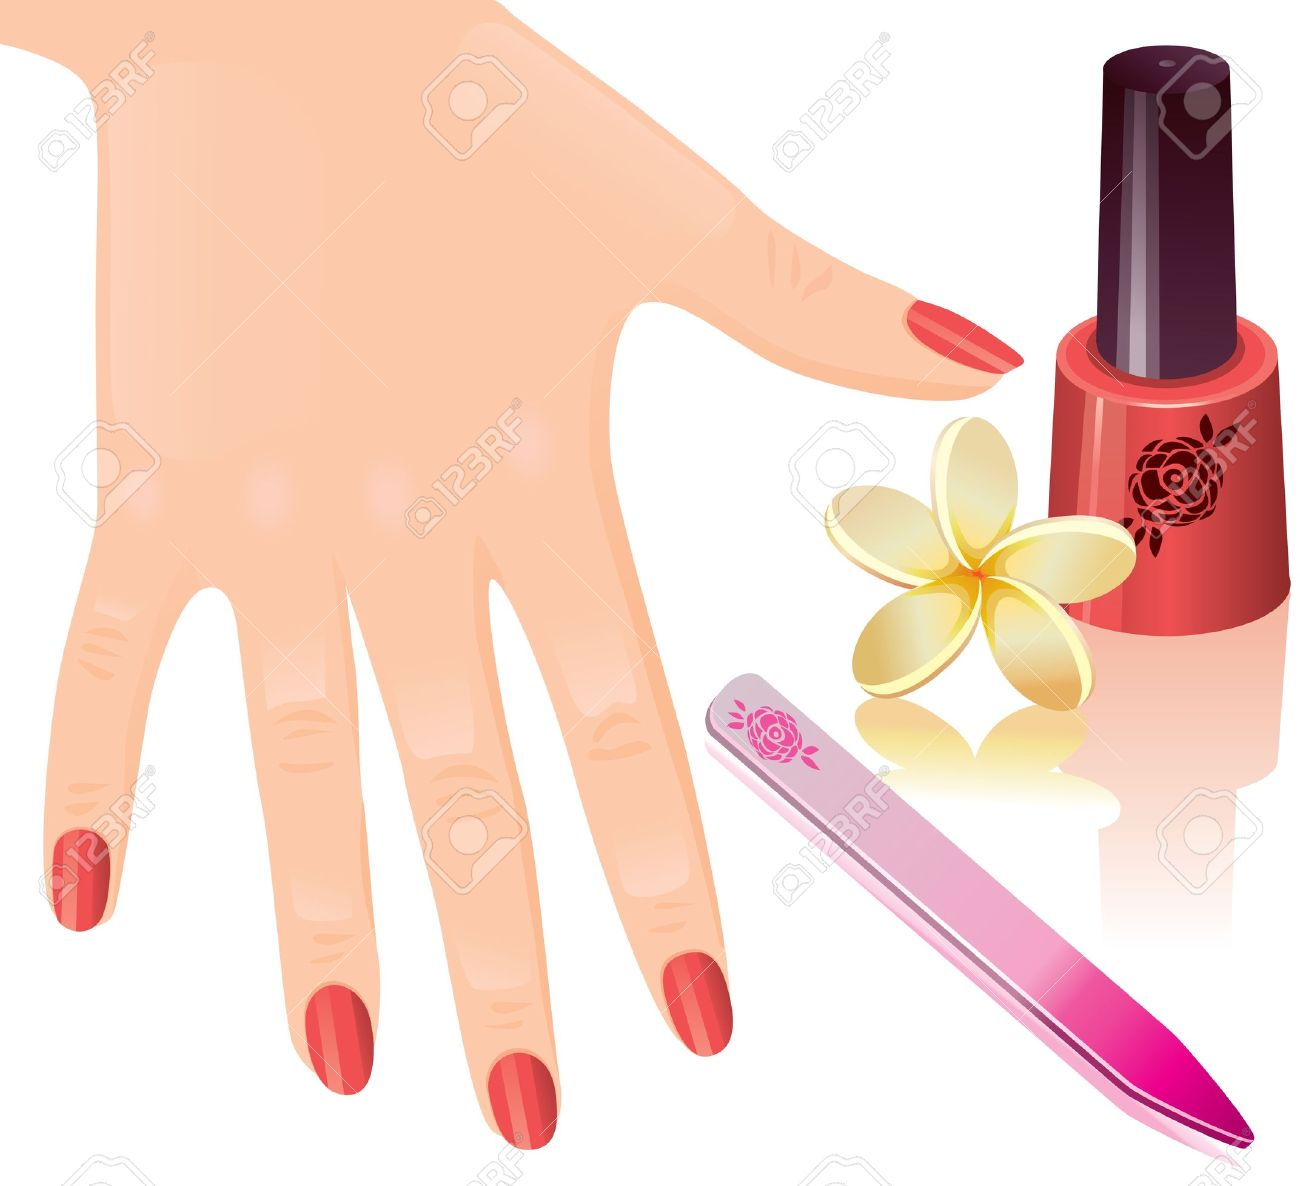 Cut Your Nails Clipart